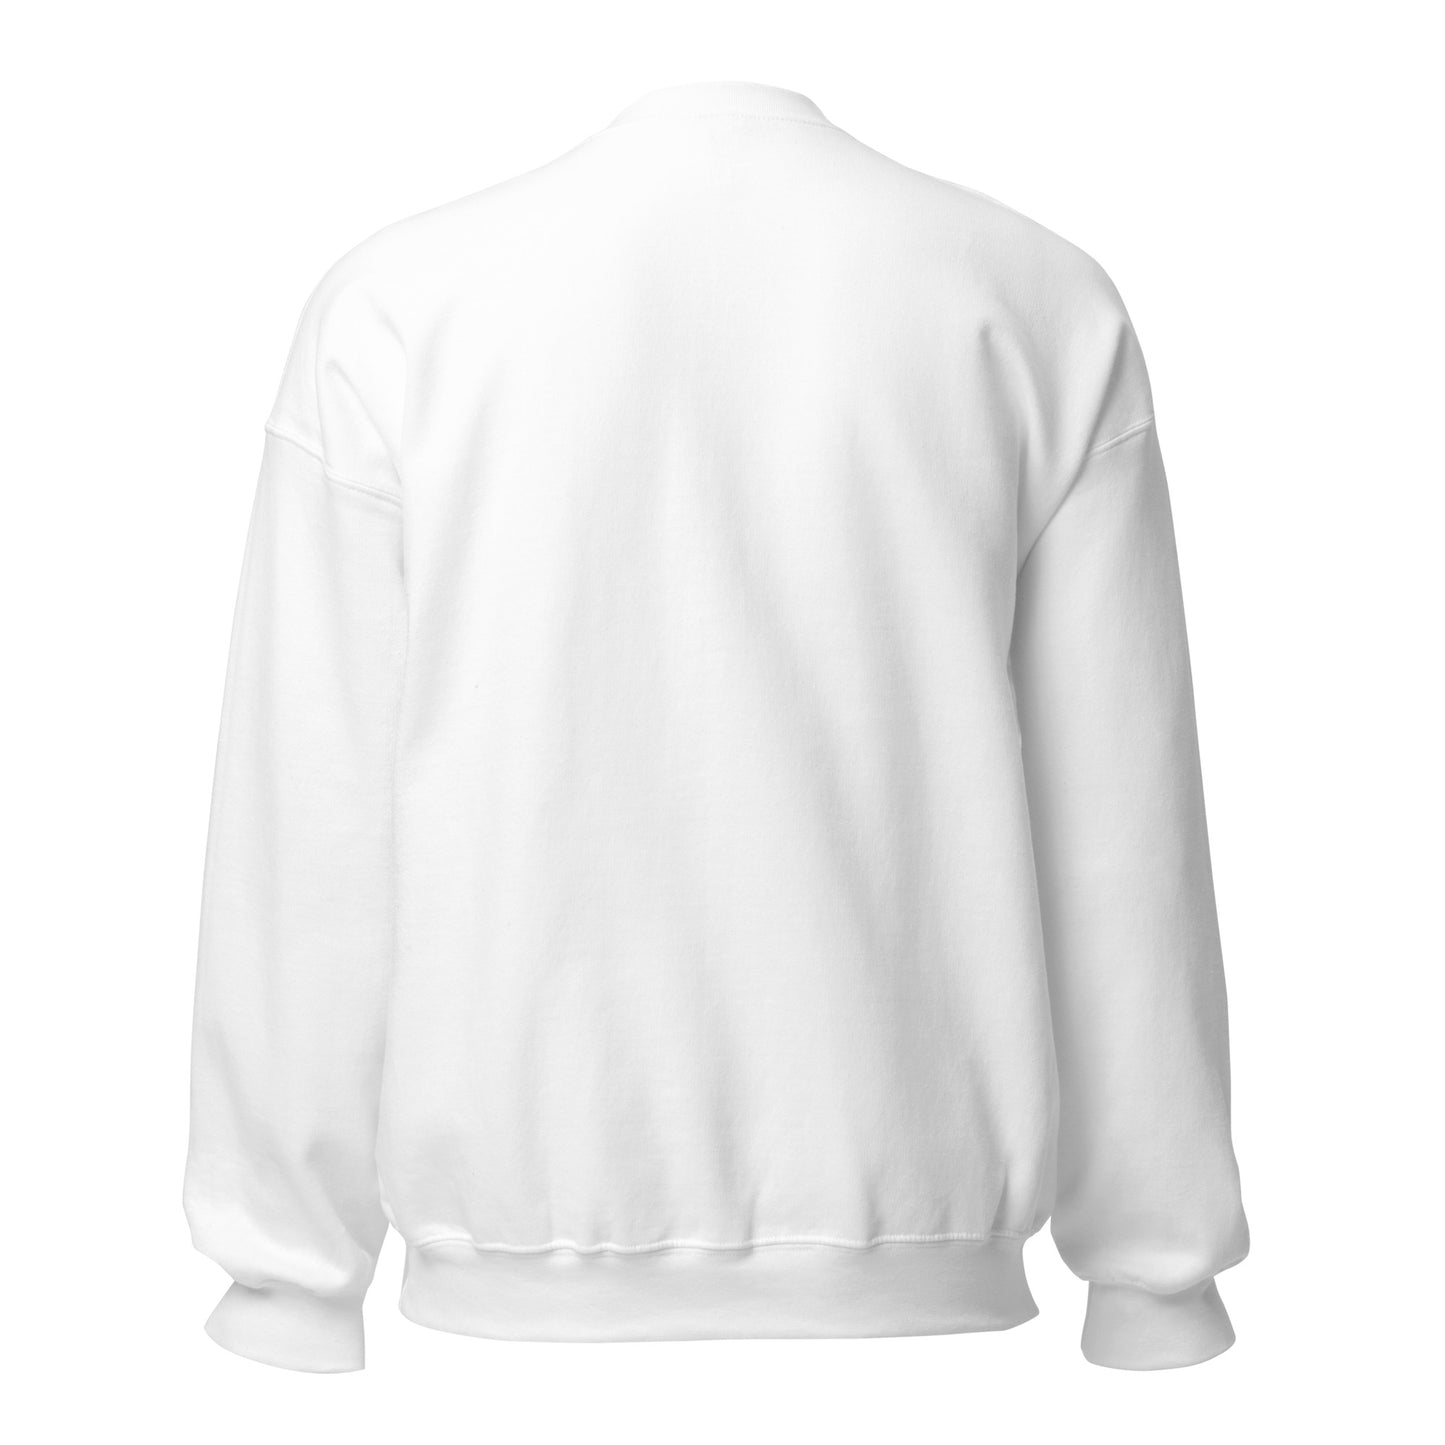 A54 Embroidered Crewneck in White